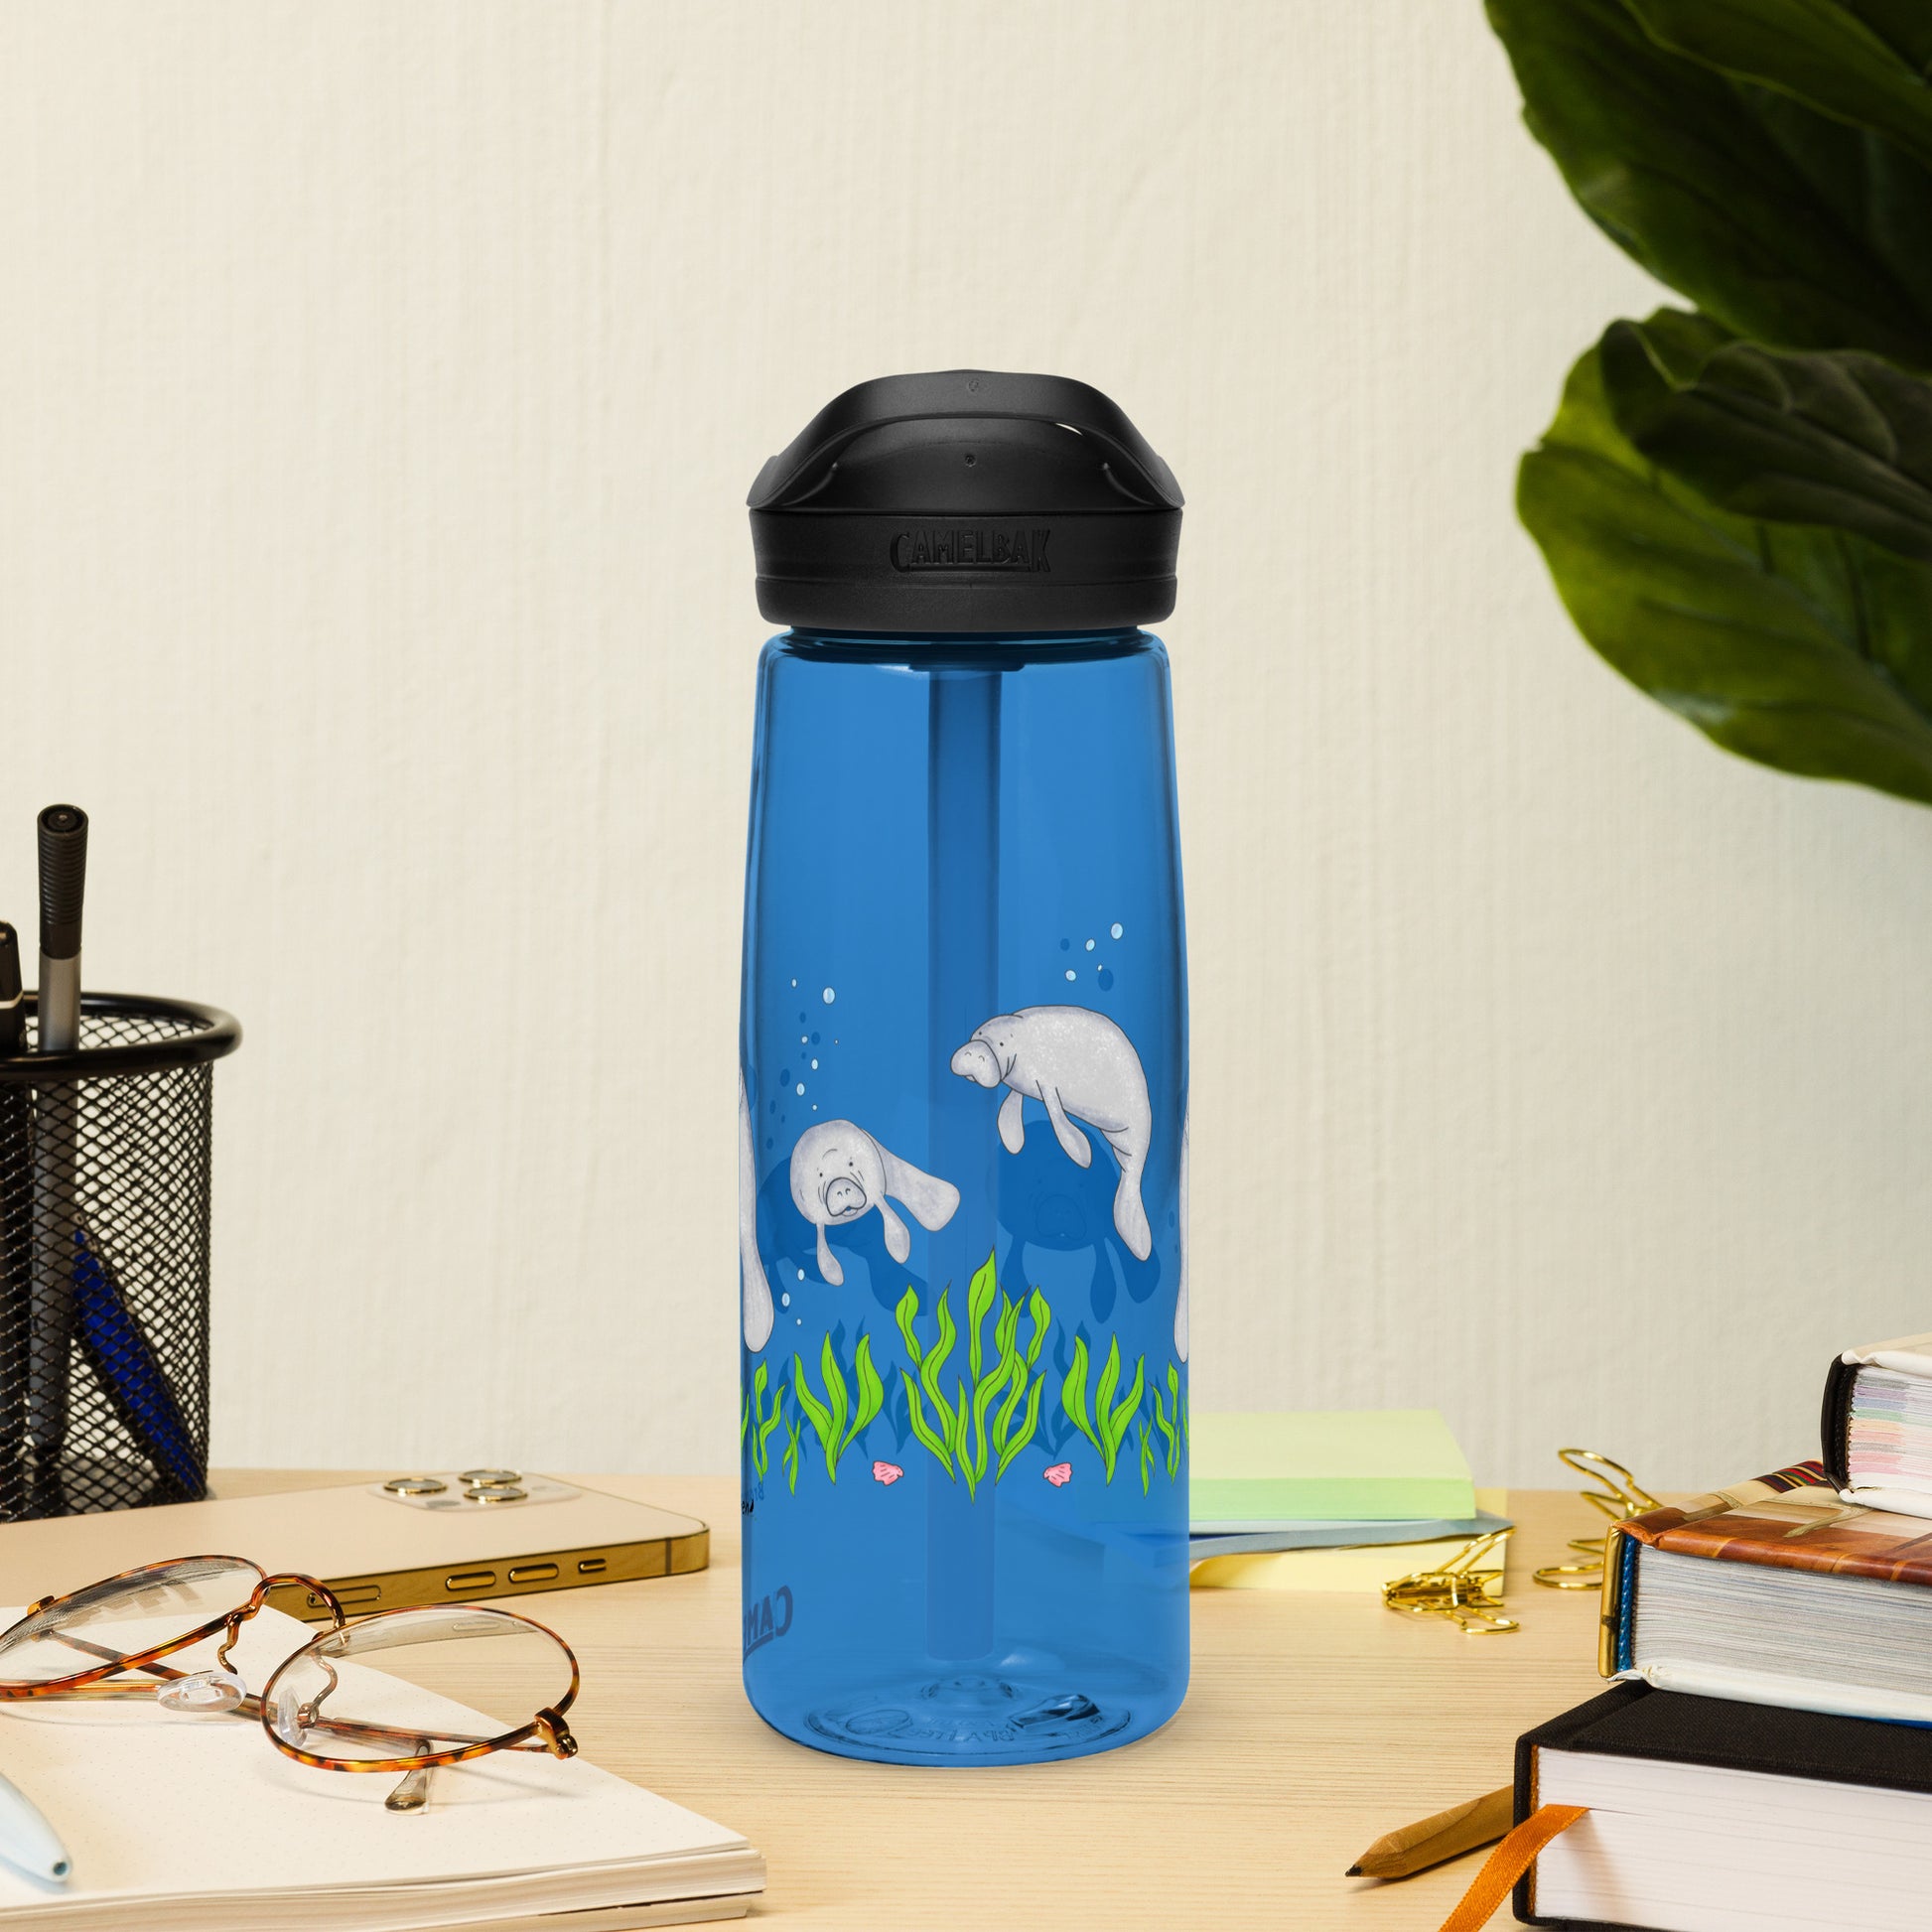 25 ounce sports water bottle with spill proof lid and bite valve. Dark blue stain and odor-resistant BPA-free plastic with manatee designs around the bottle, swimming above the seaweed and shells. Shown on tabletop by books, pen holder and glasses.